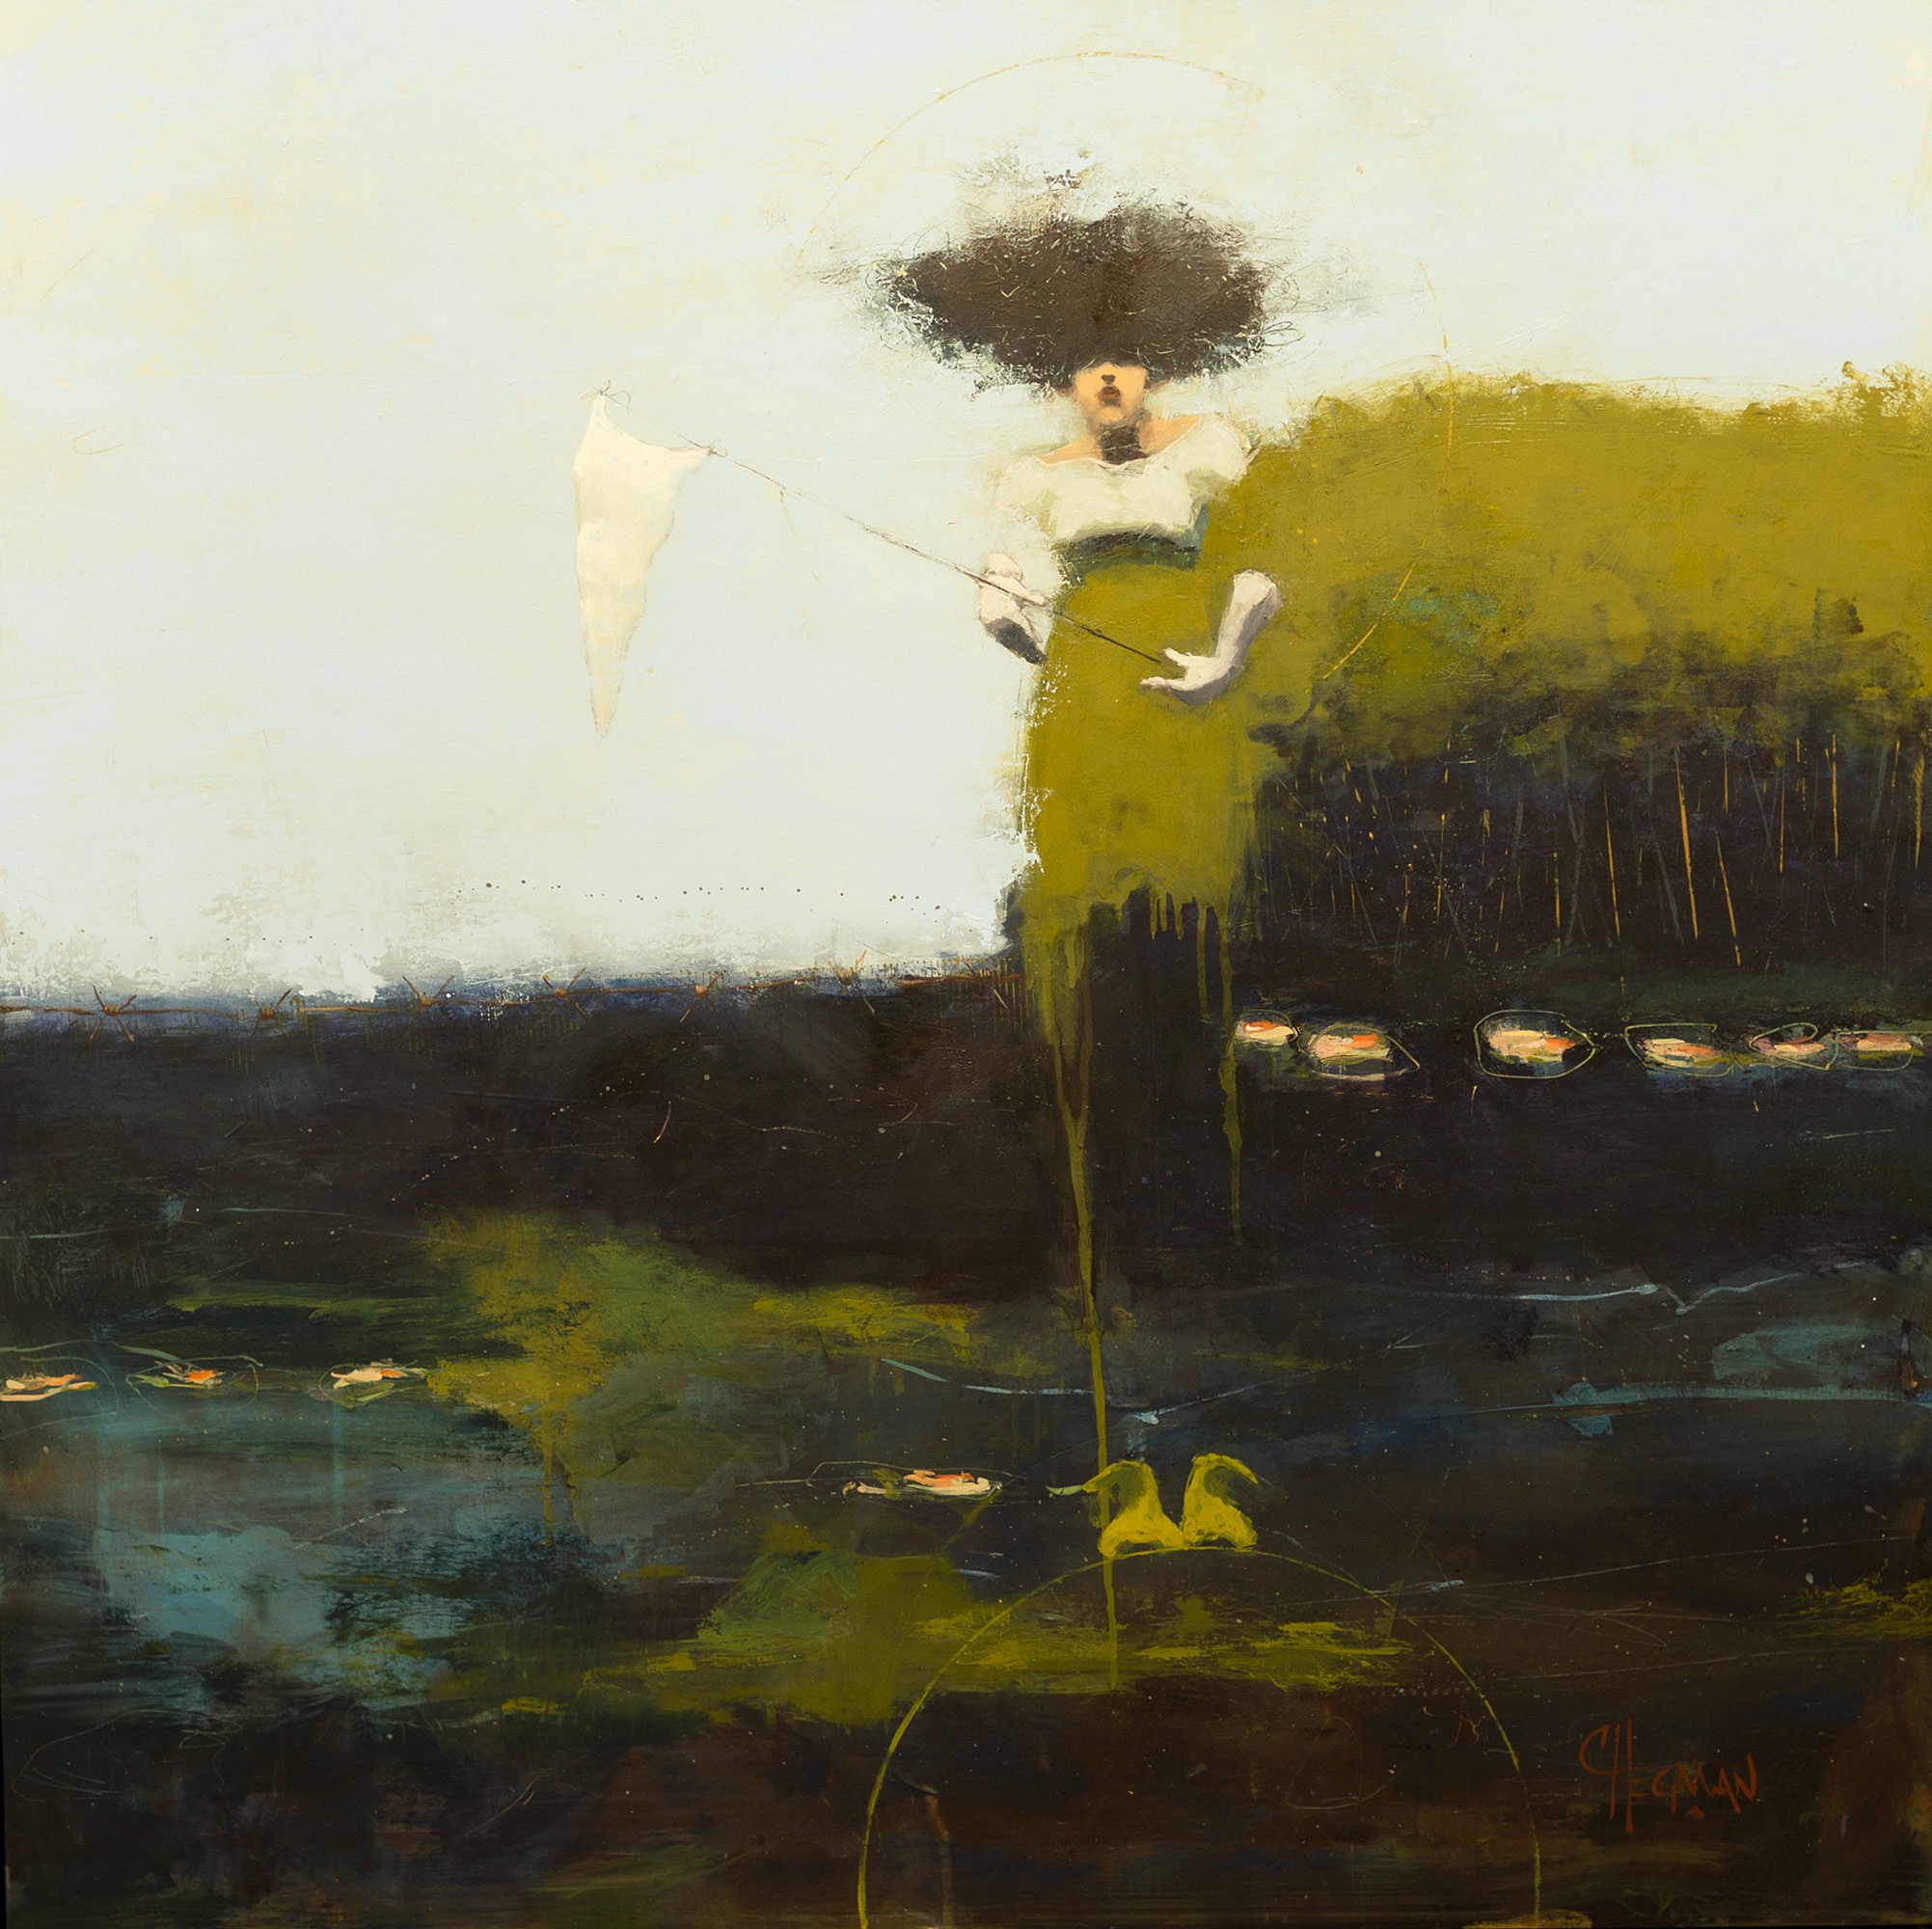 PRESS RELEASE: Visionary - Cathy Hegman Solo Show, Oct 16 - Nov 30, 2020